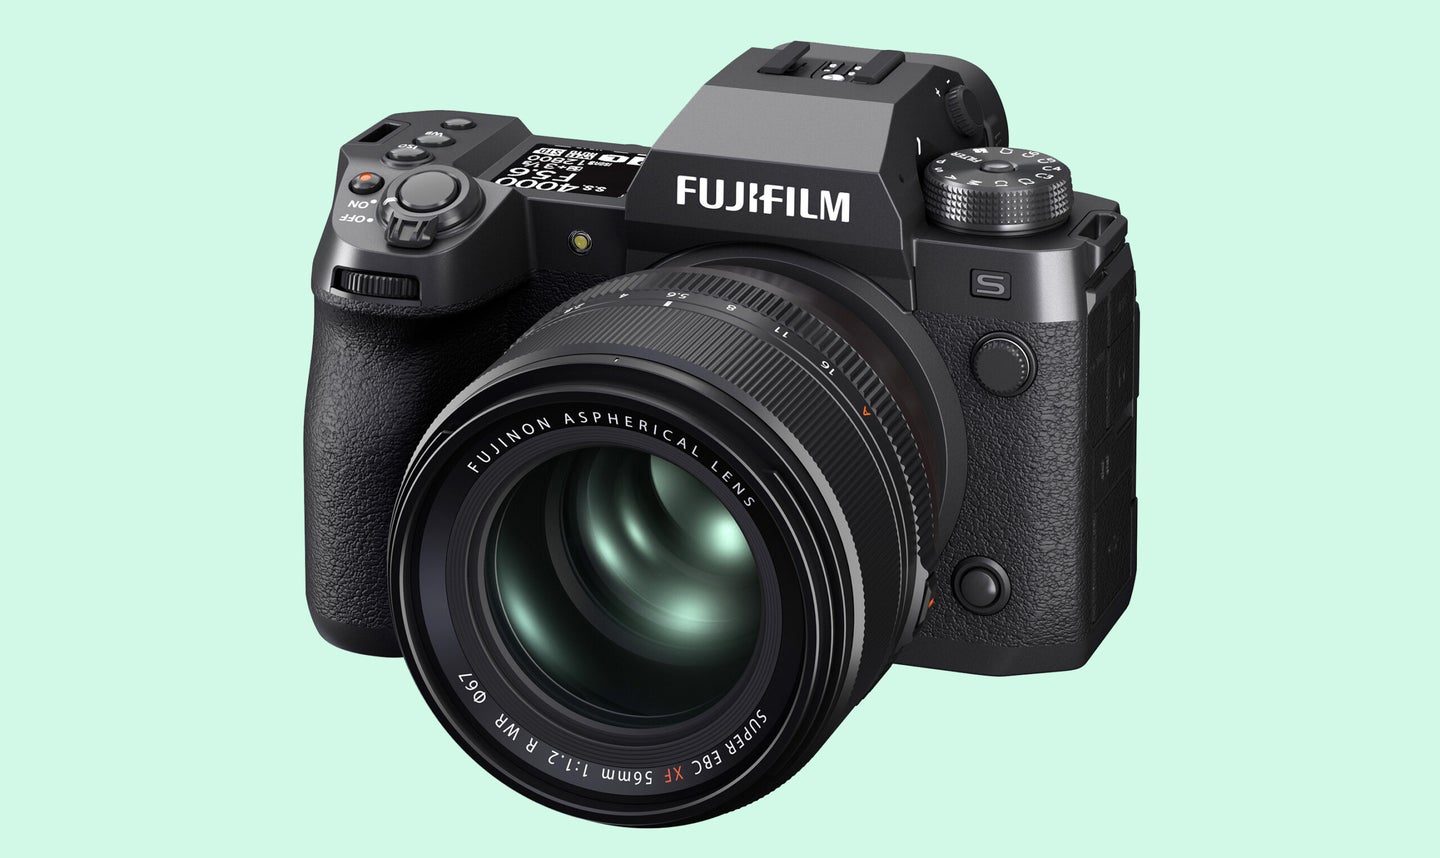 The new Fujifilm 56mm looks like a real peach of a prime